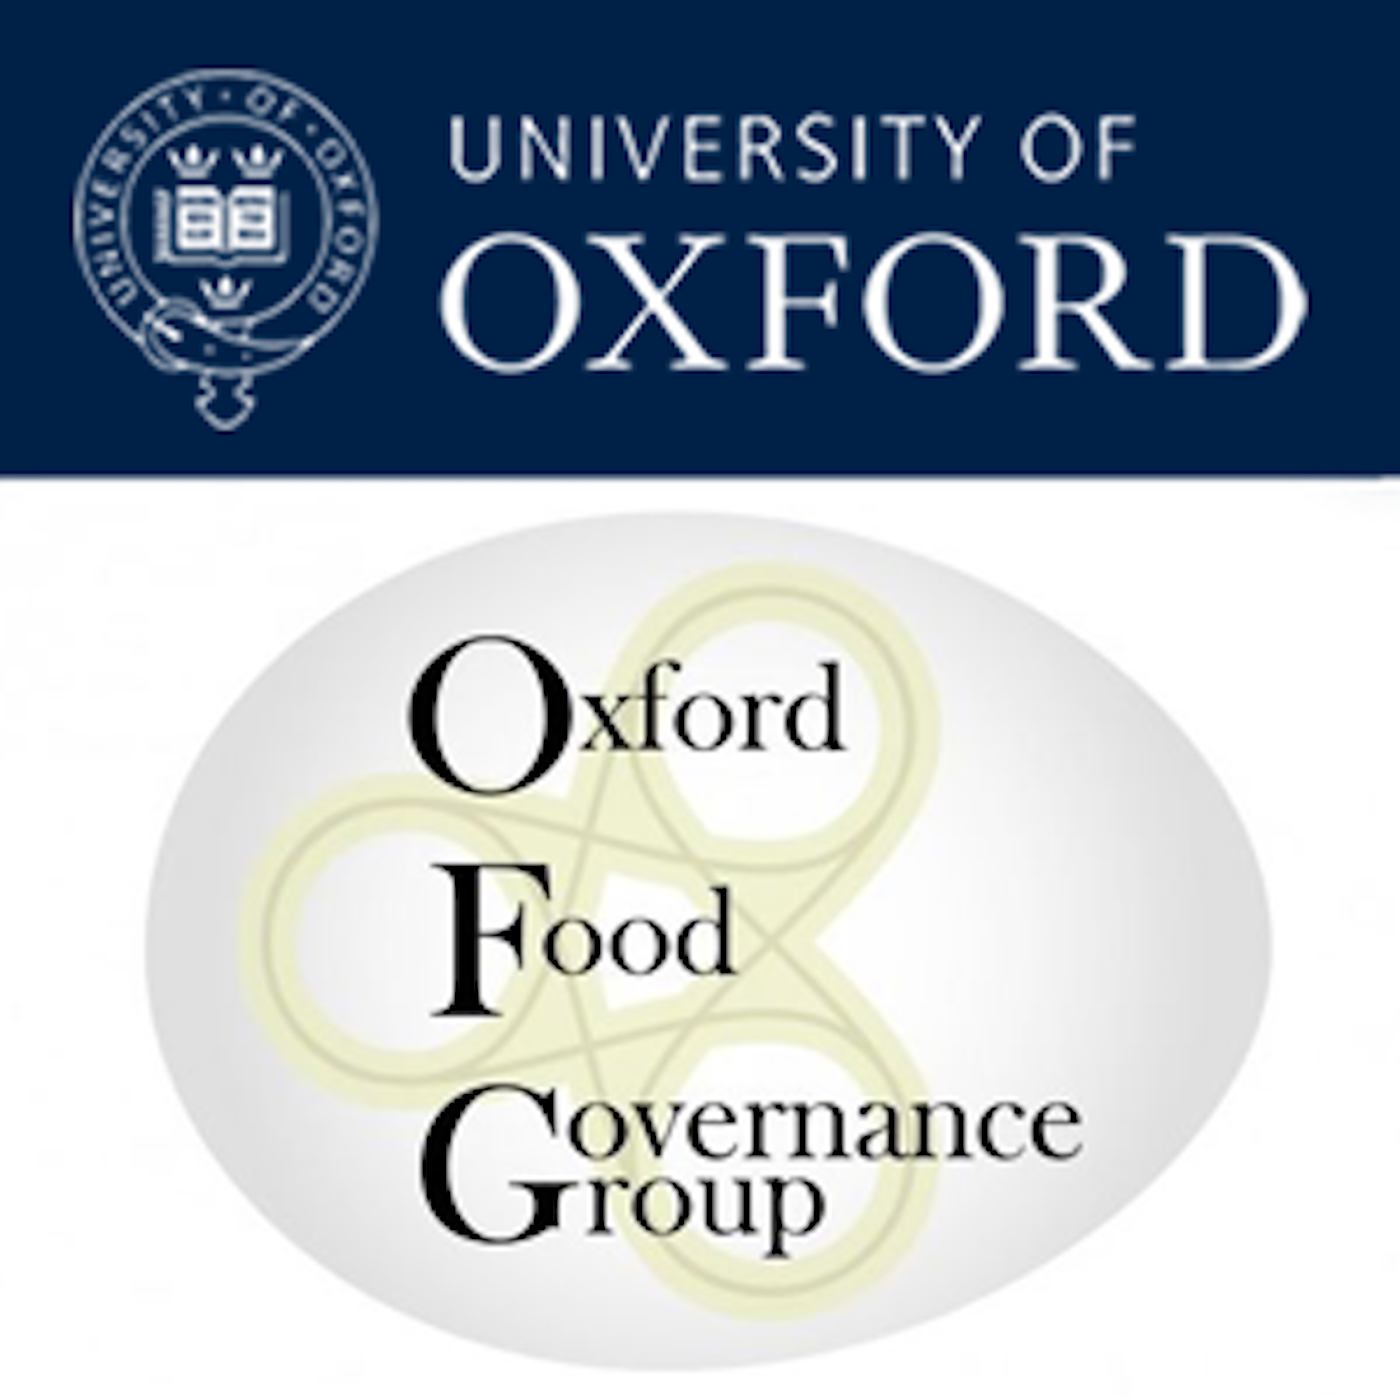 Oxford Food Governance Group: The Politics and Practices of Food